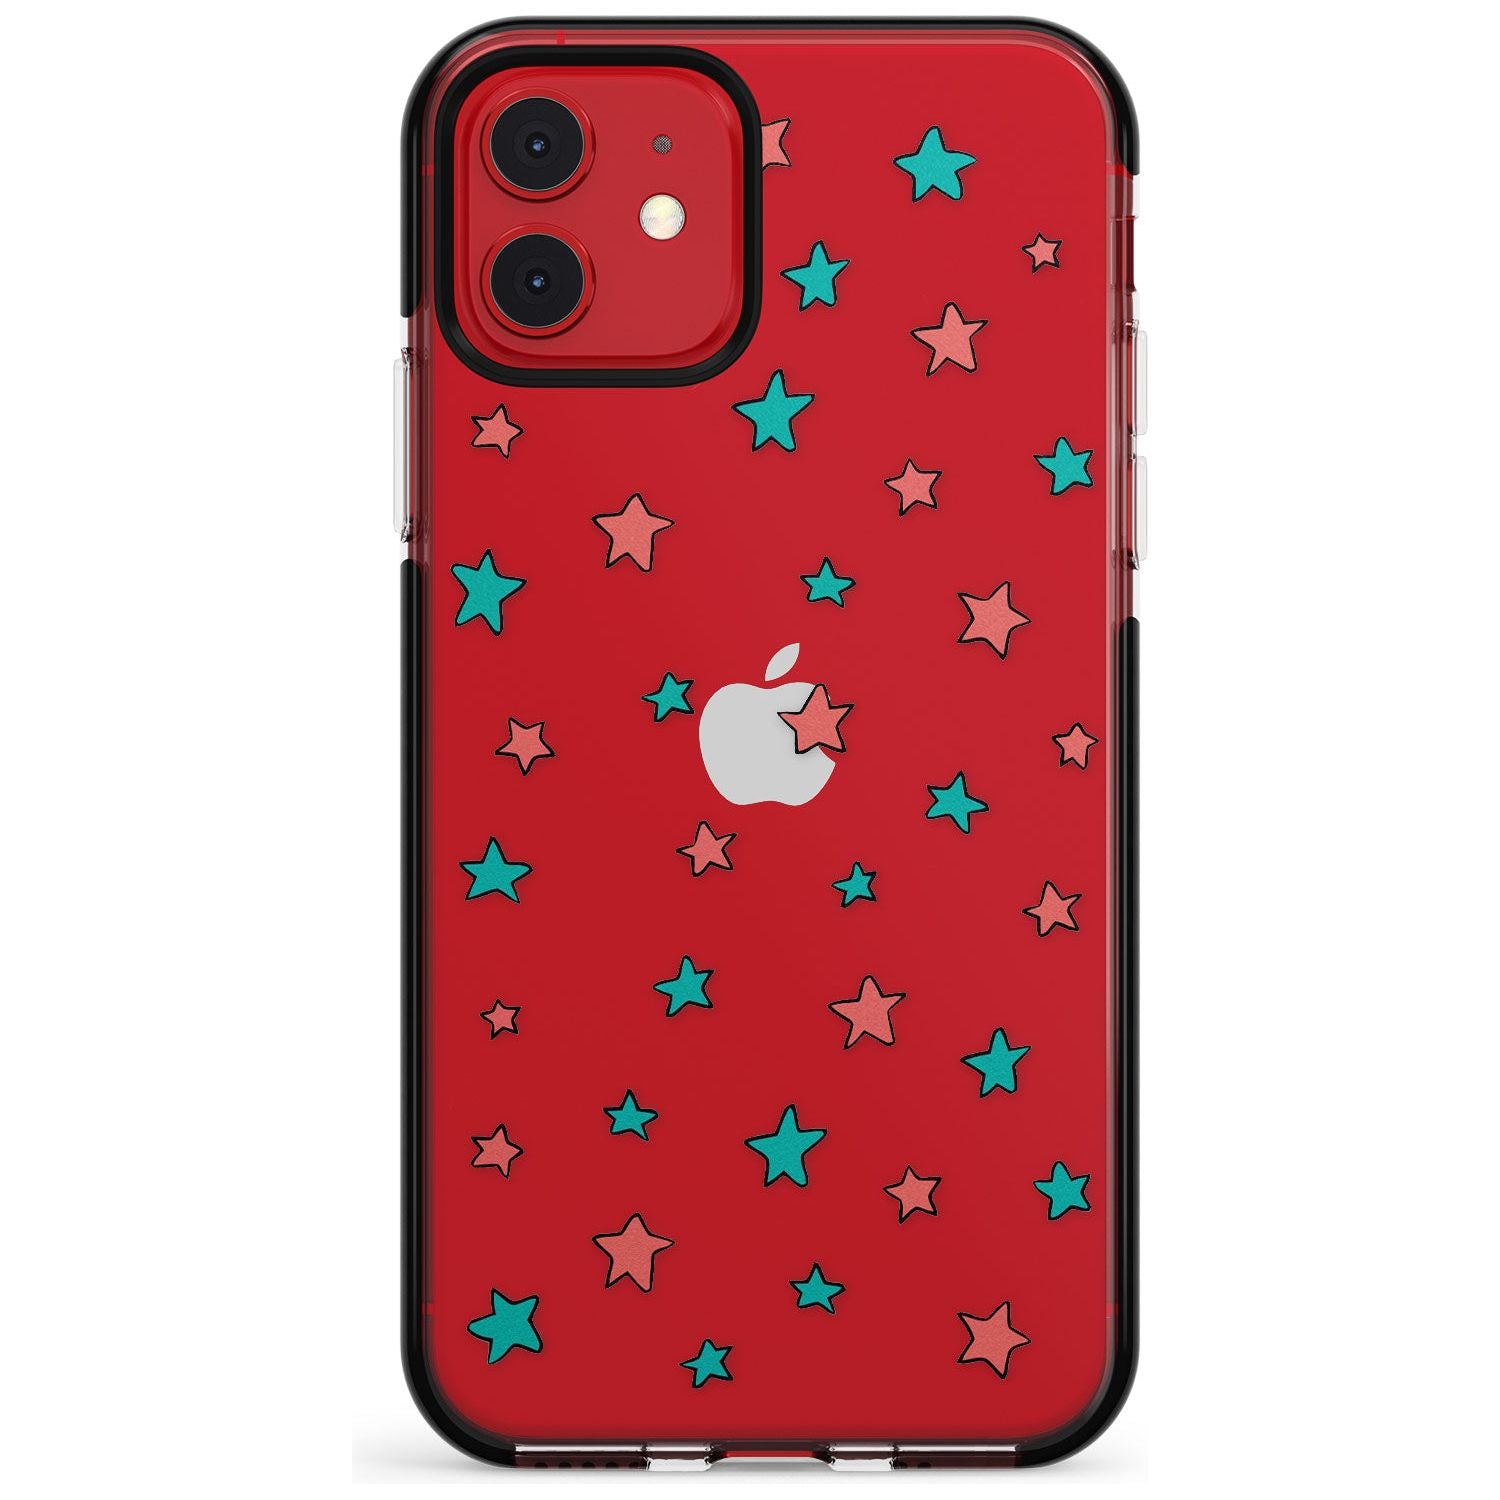 Heartstopper Stars Pattern Black Impact Phone Case for iPhone 11 Pro Max